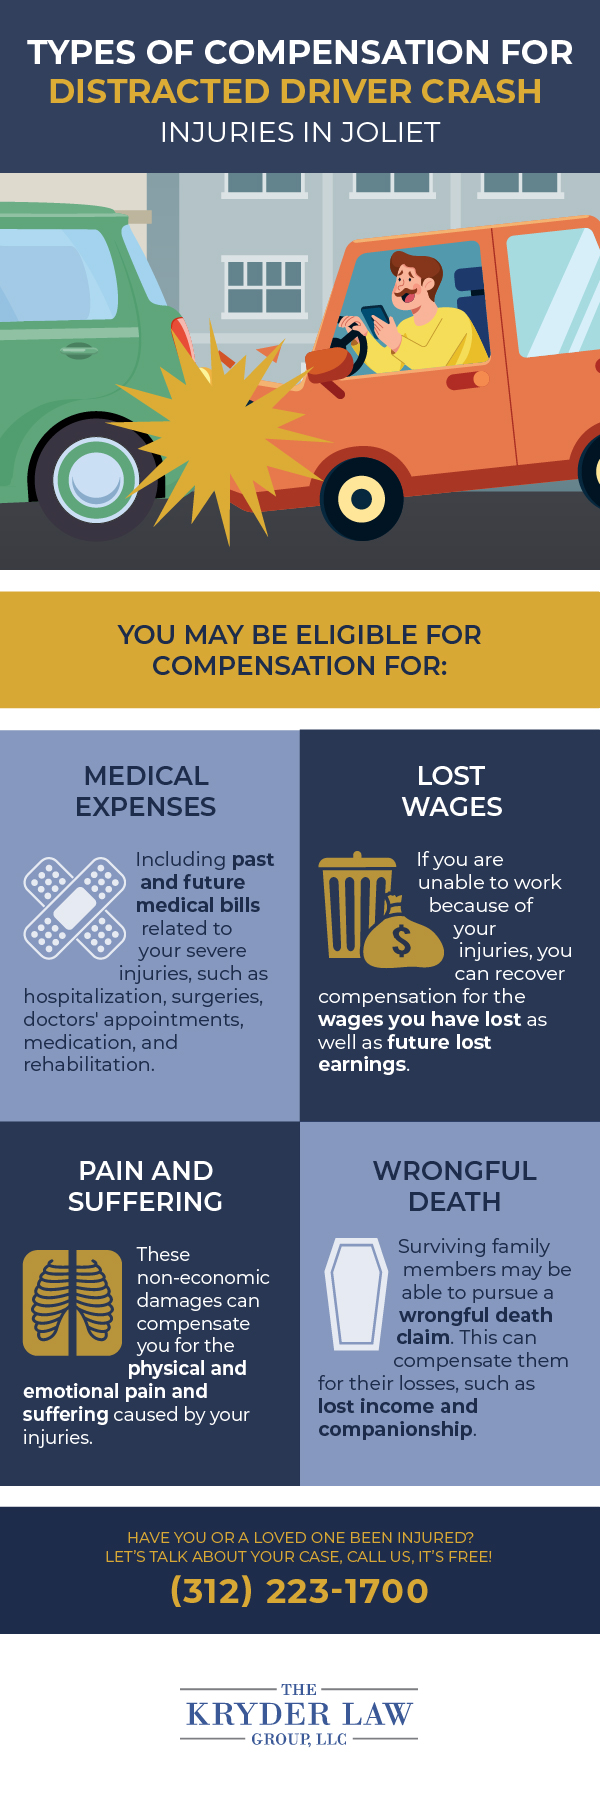 Types of Compensation for Distracted Driver Crash Injuries in Joliet Infographic